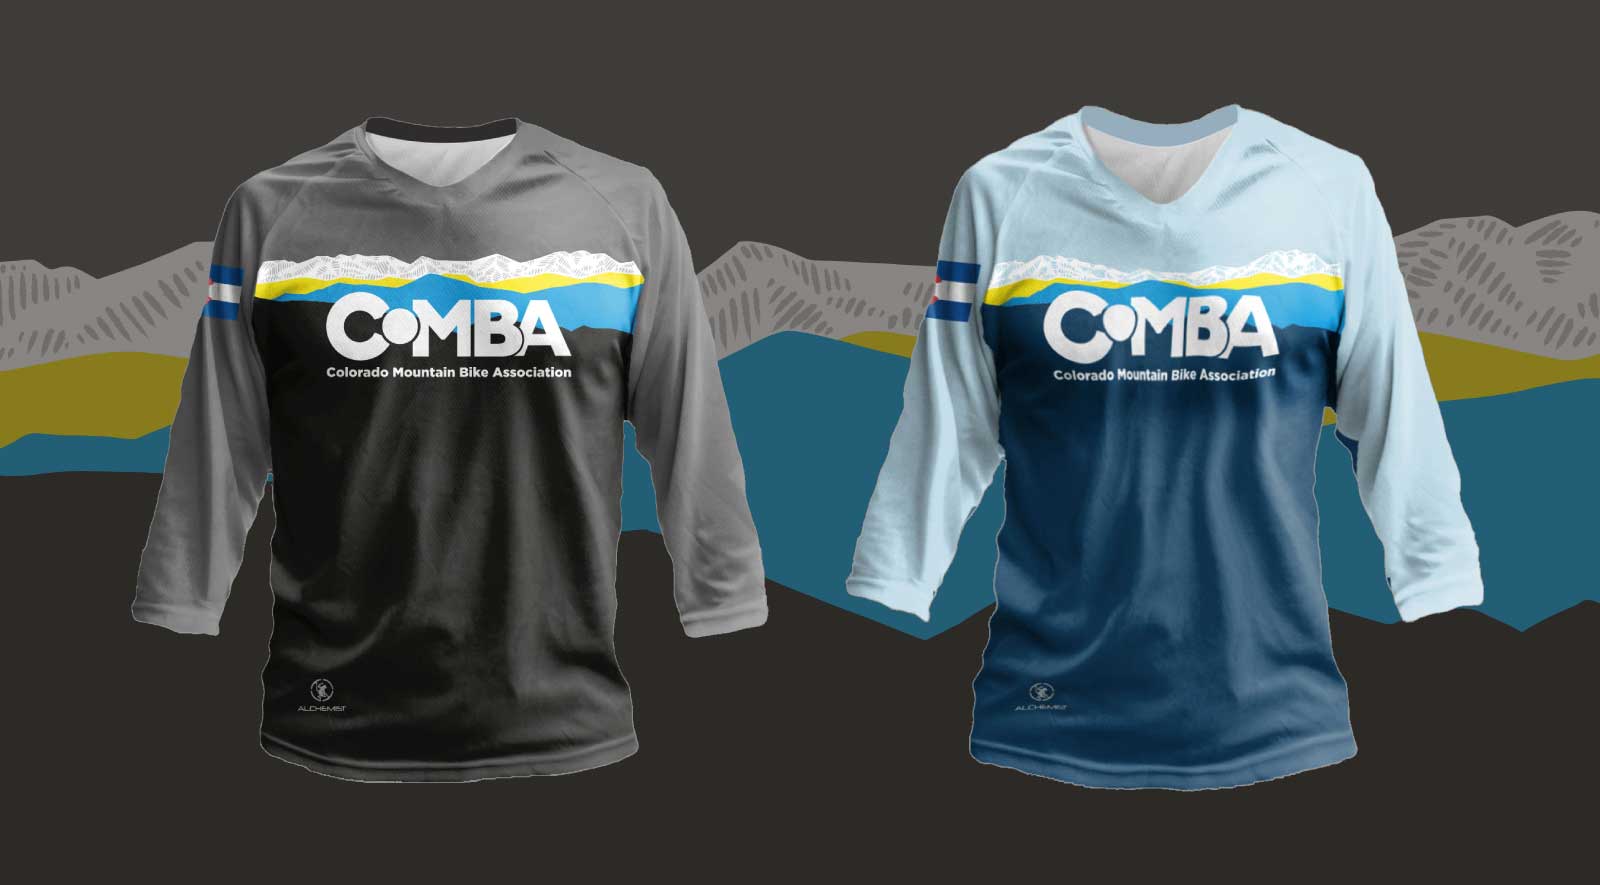 Two MTB jerseys with COMBA's logo and an illustration of the Front Range. One is black and grey, the other shades of blue.